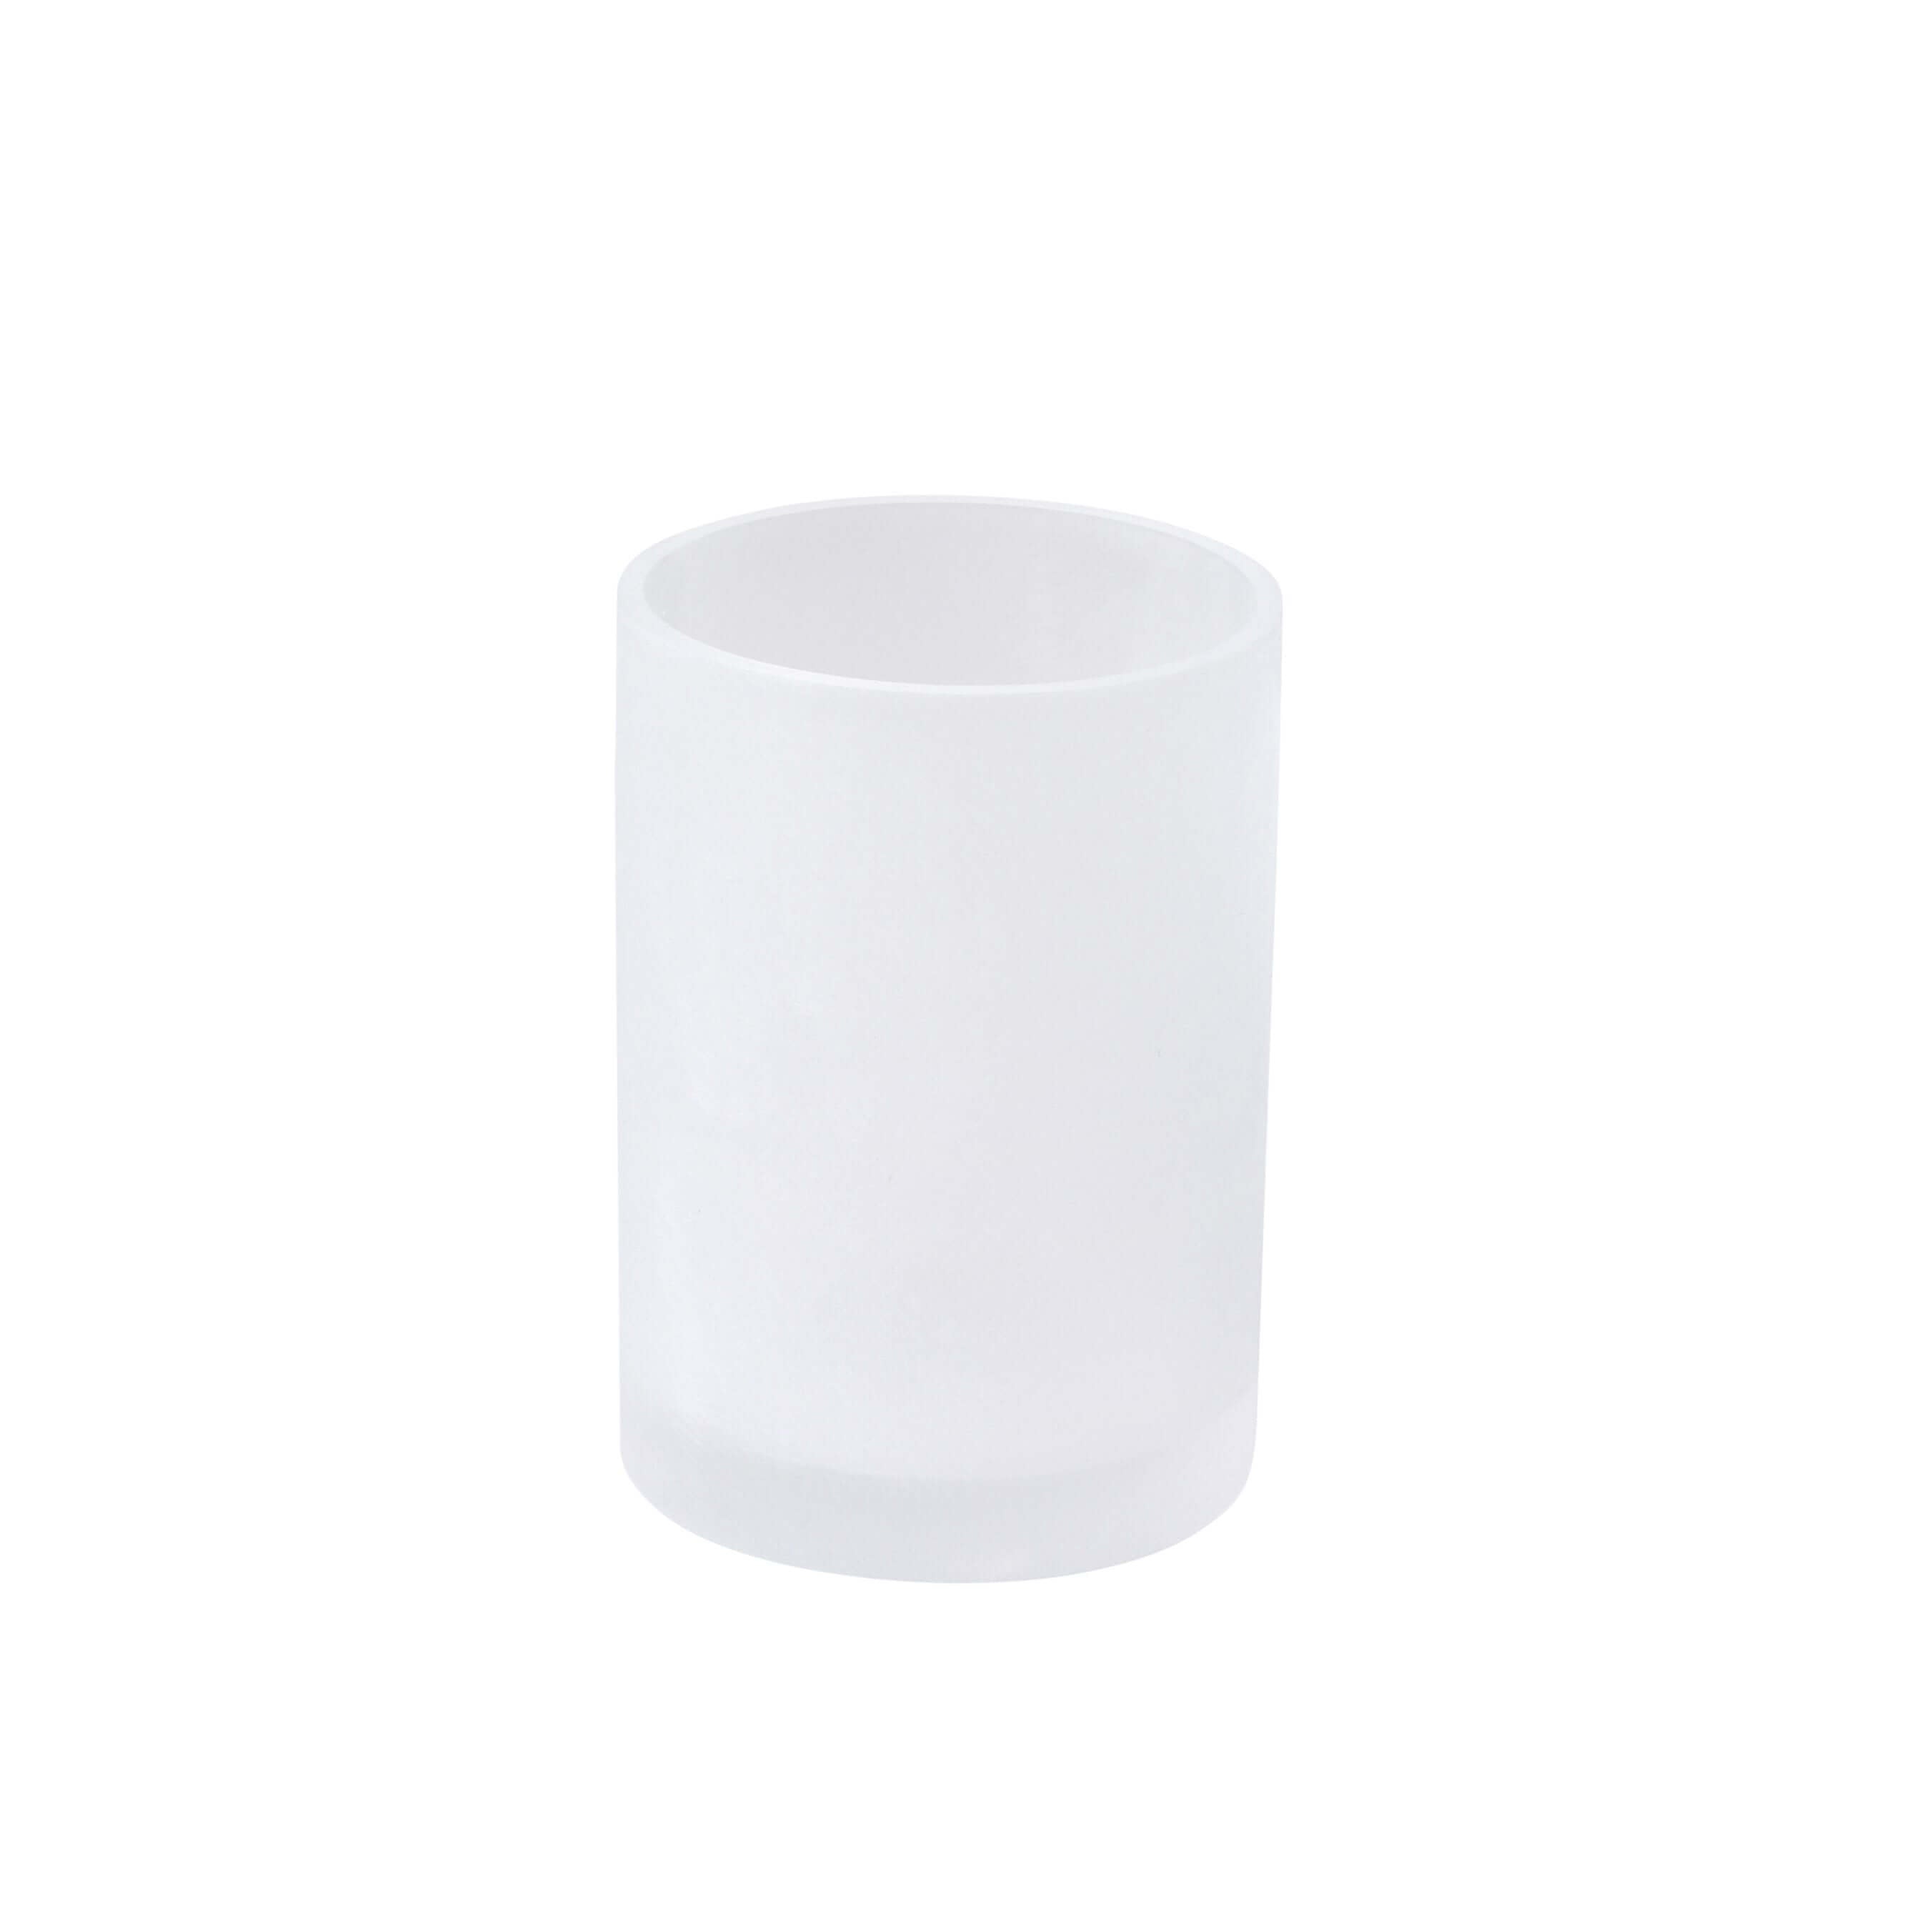 Mike + Ally - Ice Frosted Snow Tumbler - 31171 - White - 